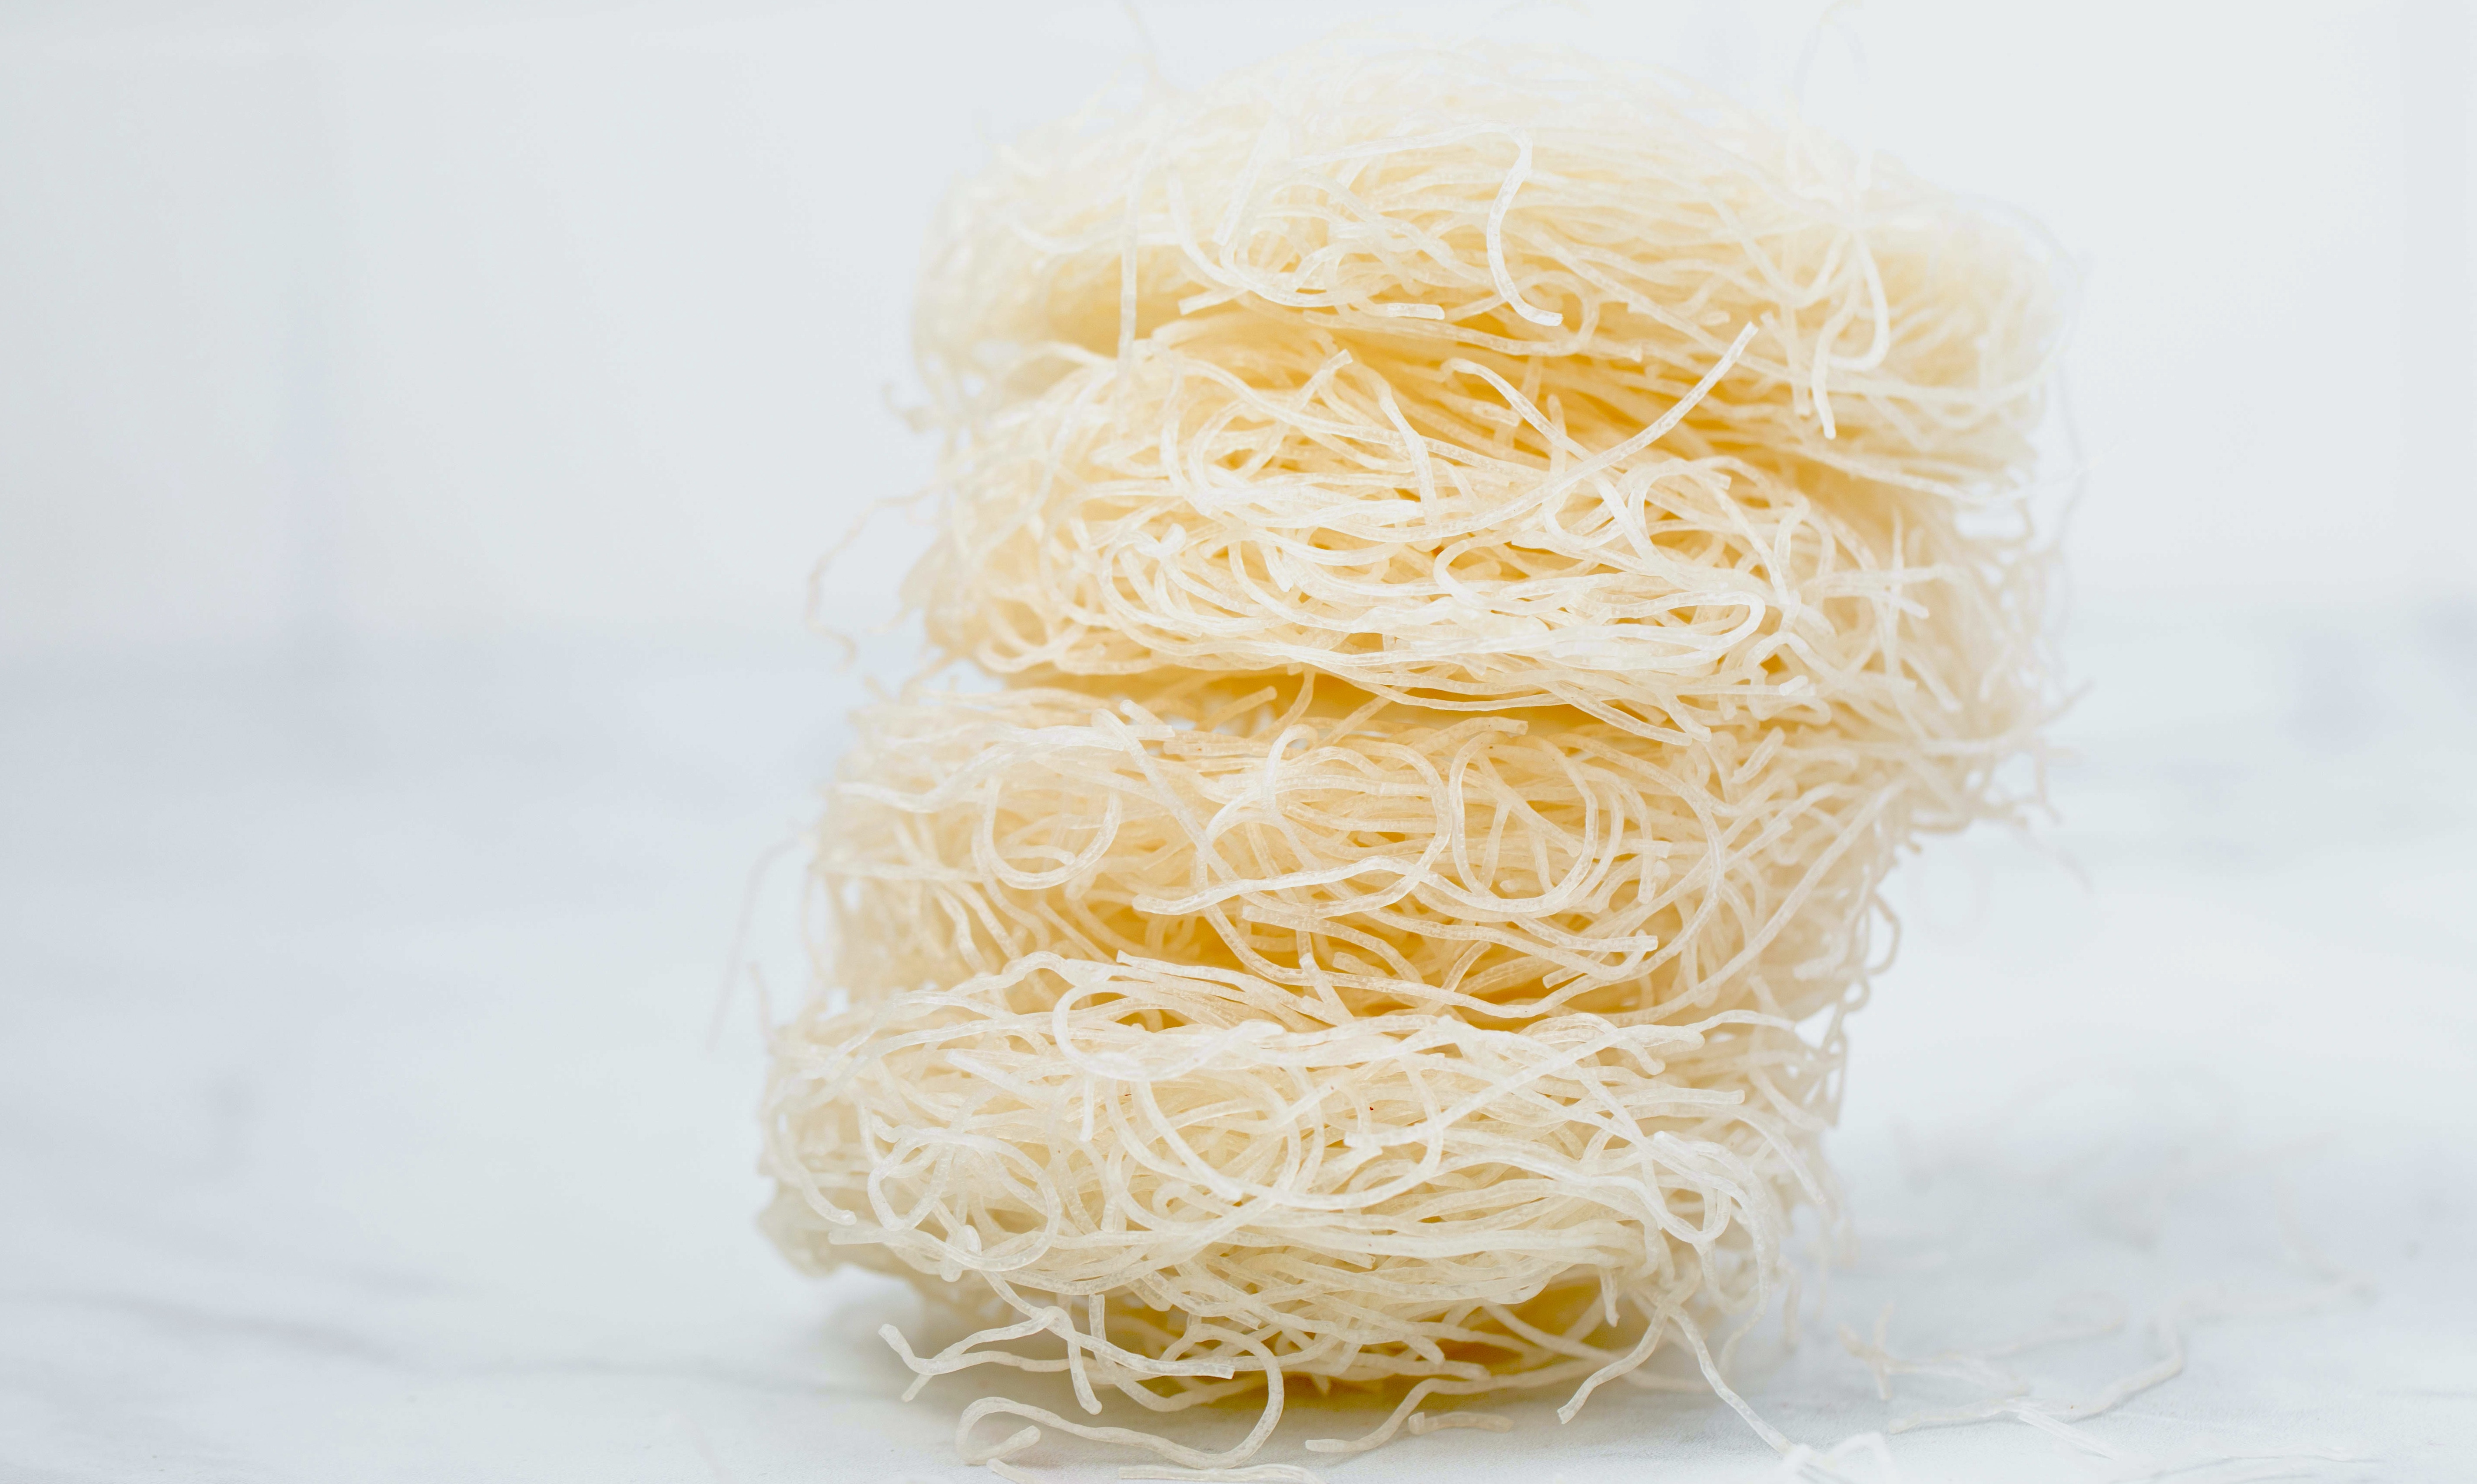 Uncooked rice noodles sit in front of a white background